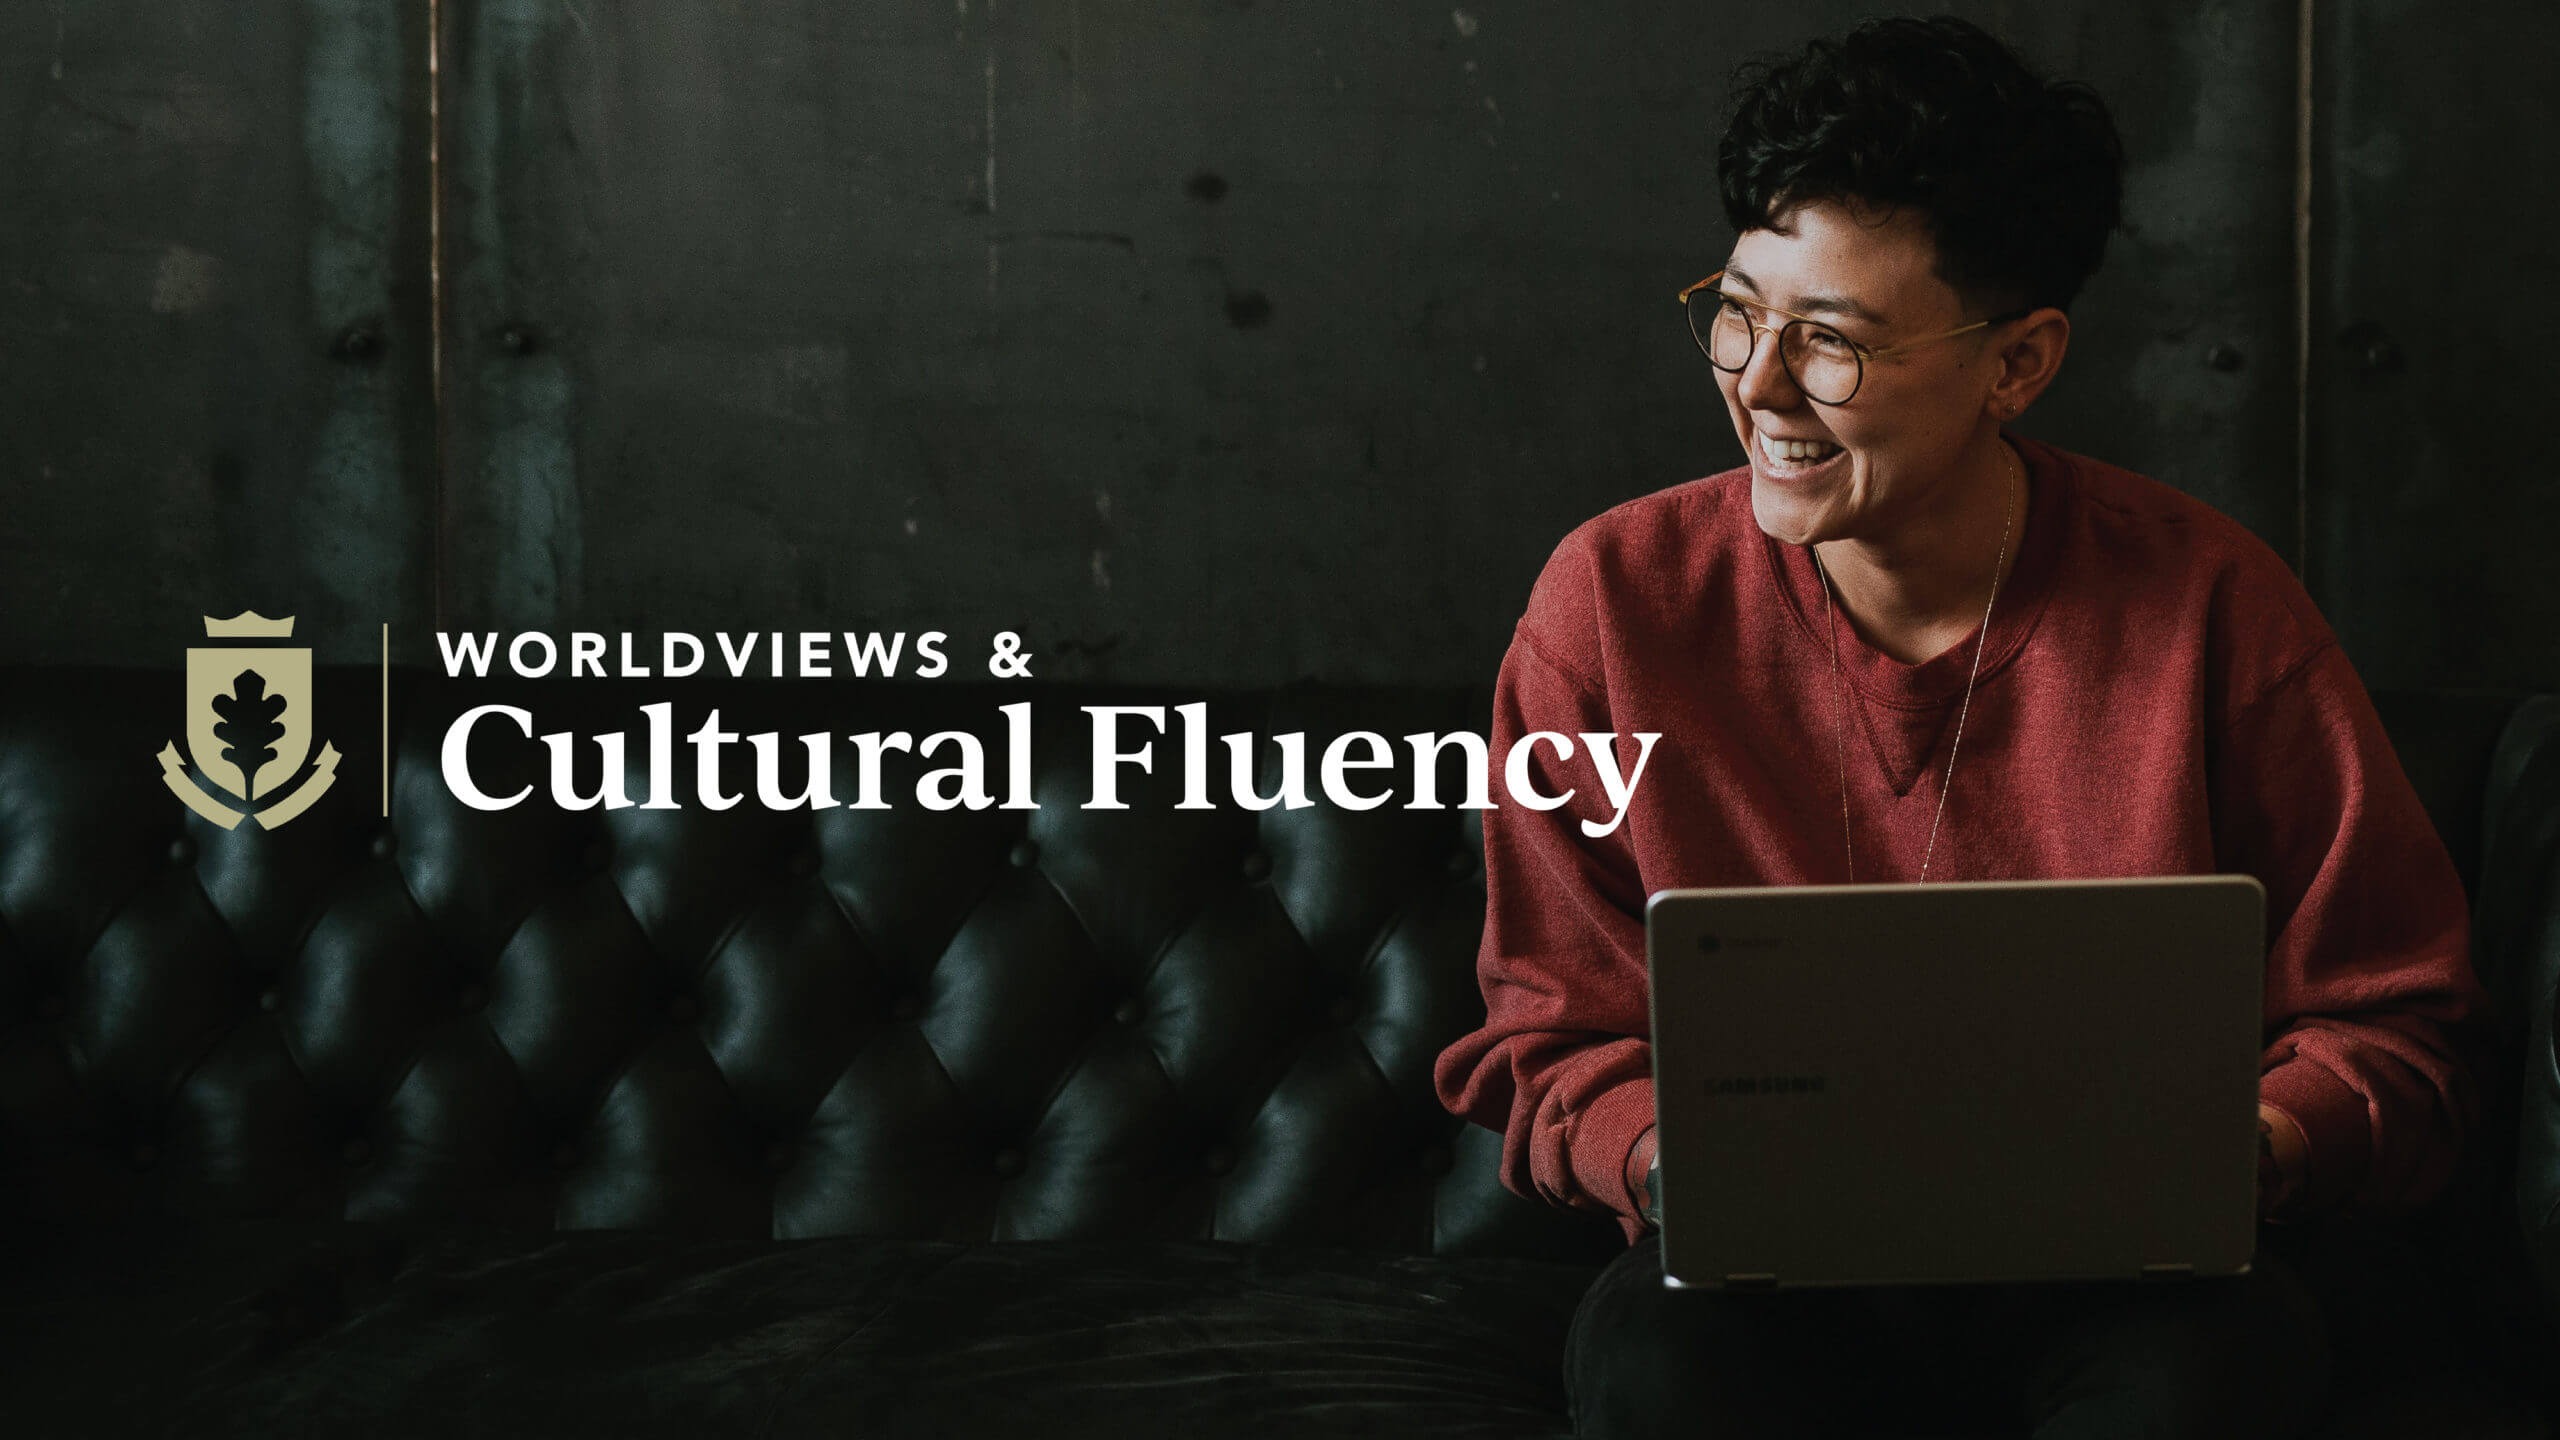 Key-Image-Worldviews-Cultural-Fluency-01-scaled